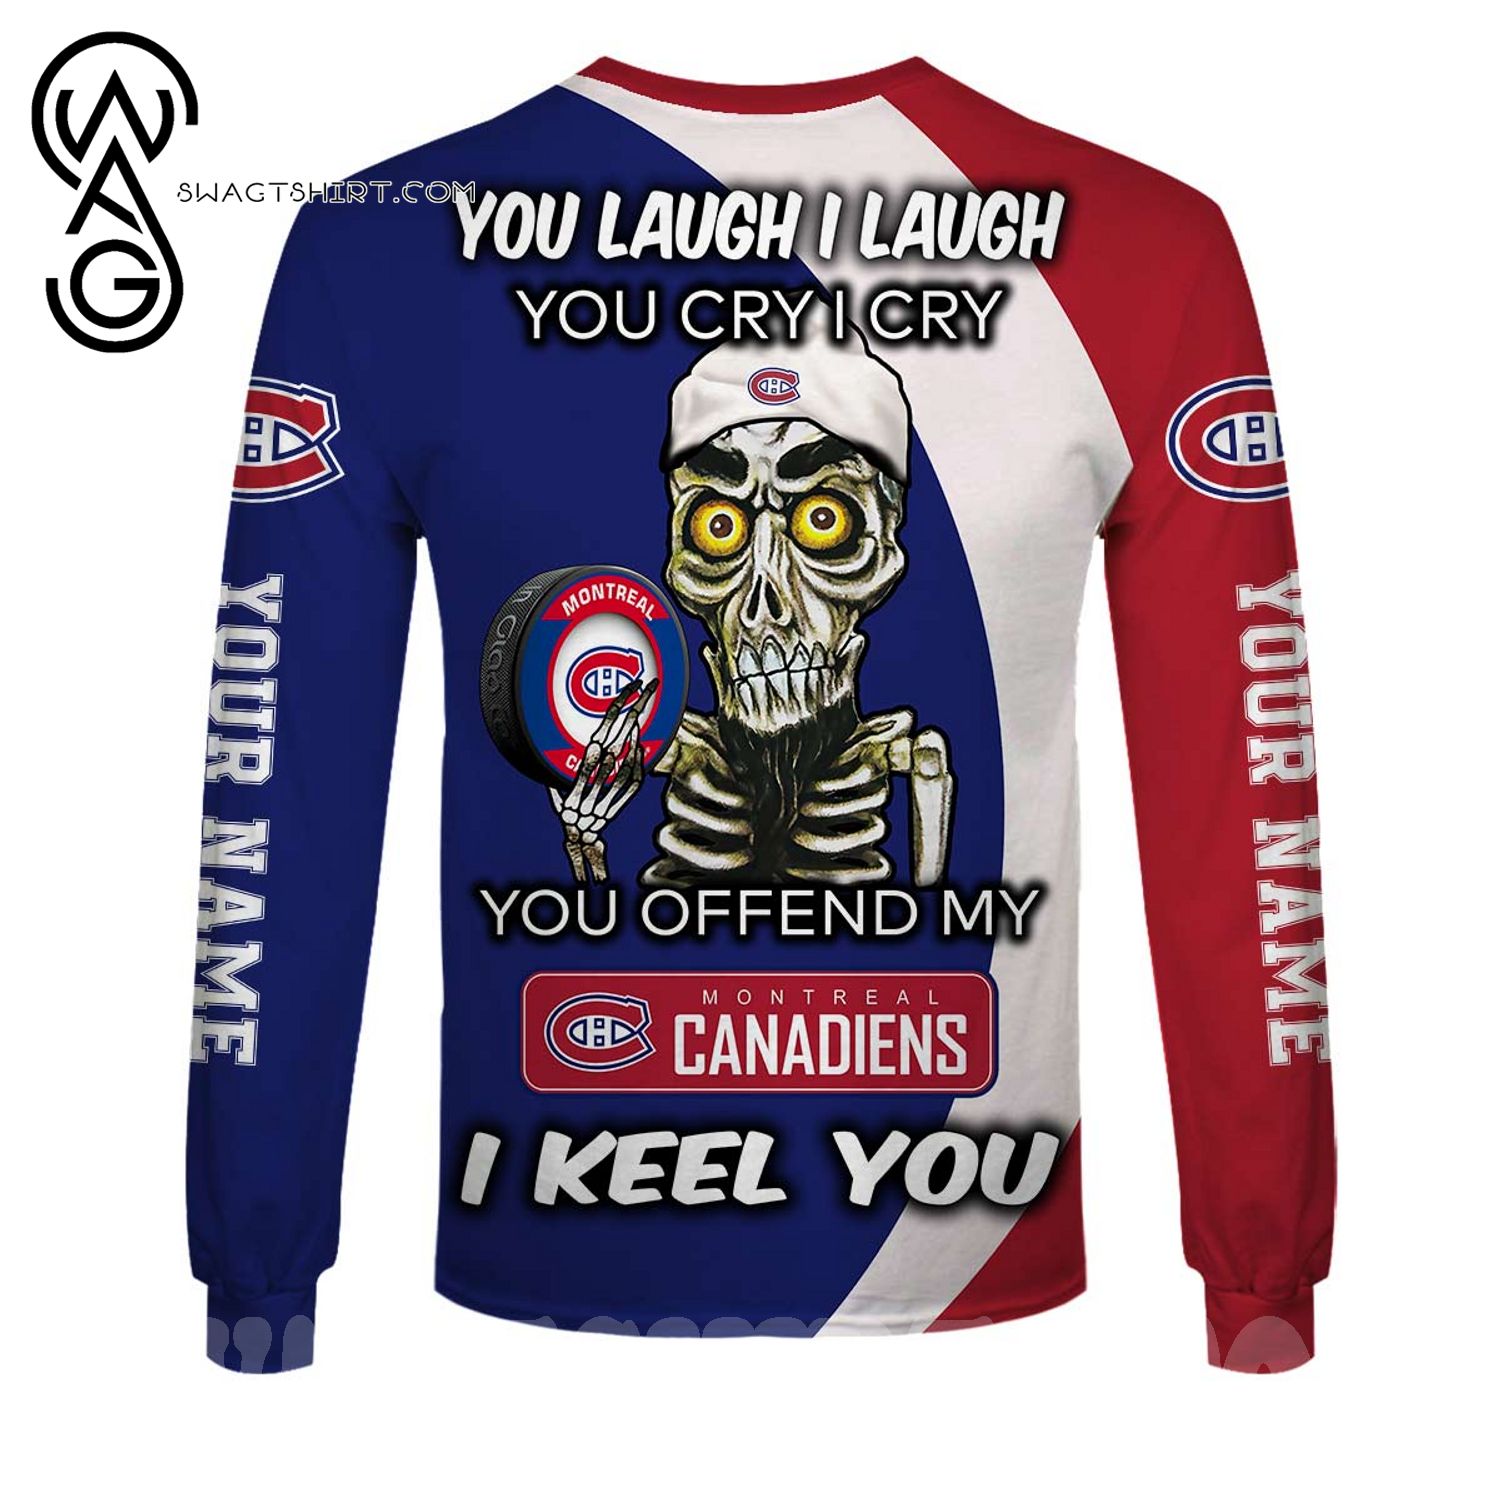 Best Selling Product] Personalized NHL You laugh i laugh cry i cry Montreal Canadiens For Sports Fan 3D